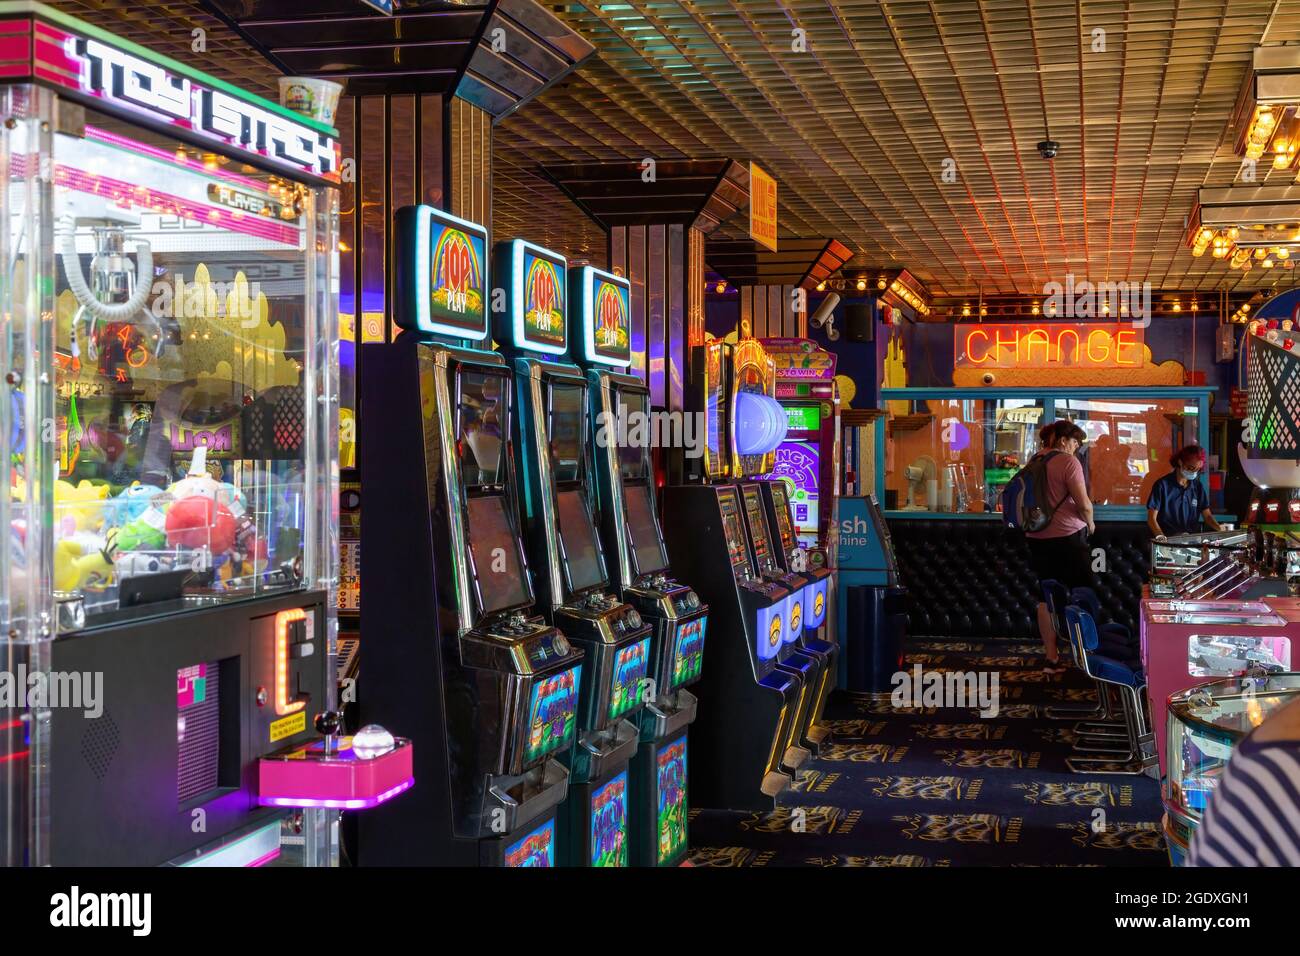 08-12-2021 Portsmouth, Hampshire, UK Arcade games and fruit machines in an amusement arcade with neao lights Stock Photo